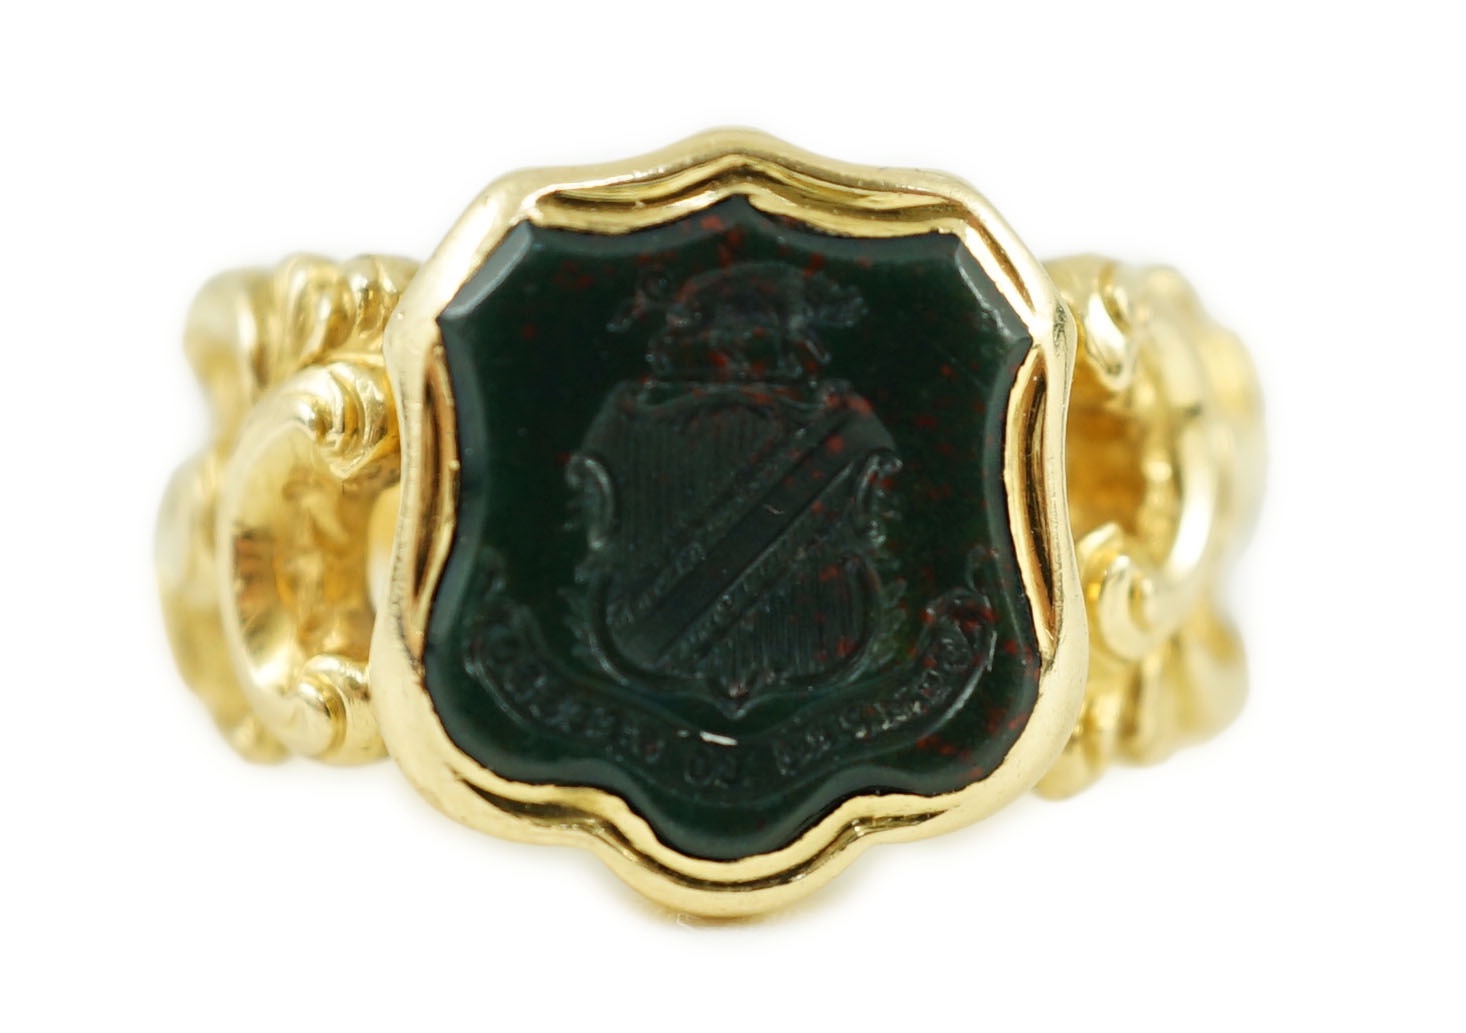 A 19th century gold and bloodstone set intaglio ring